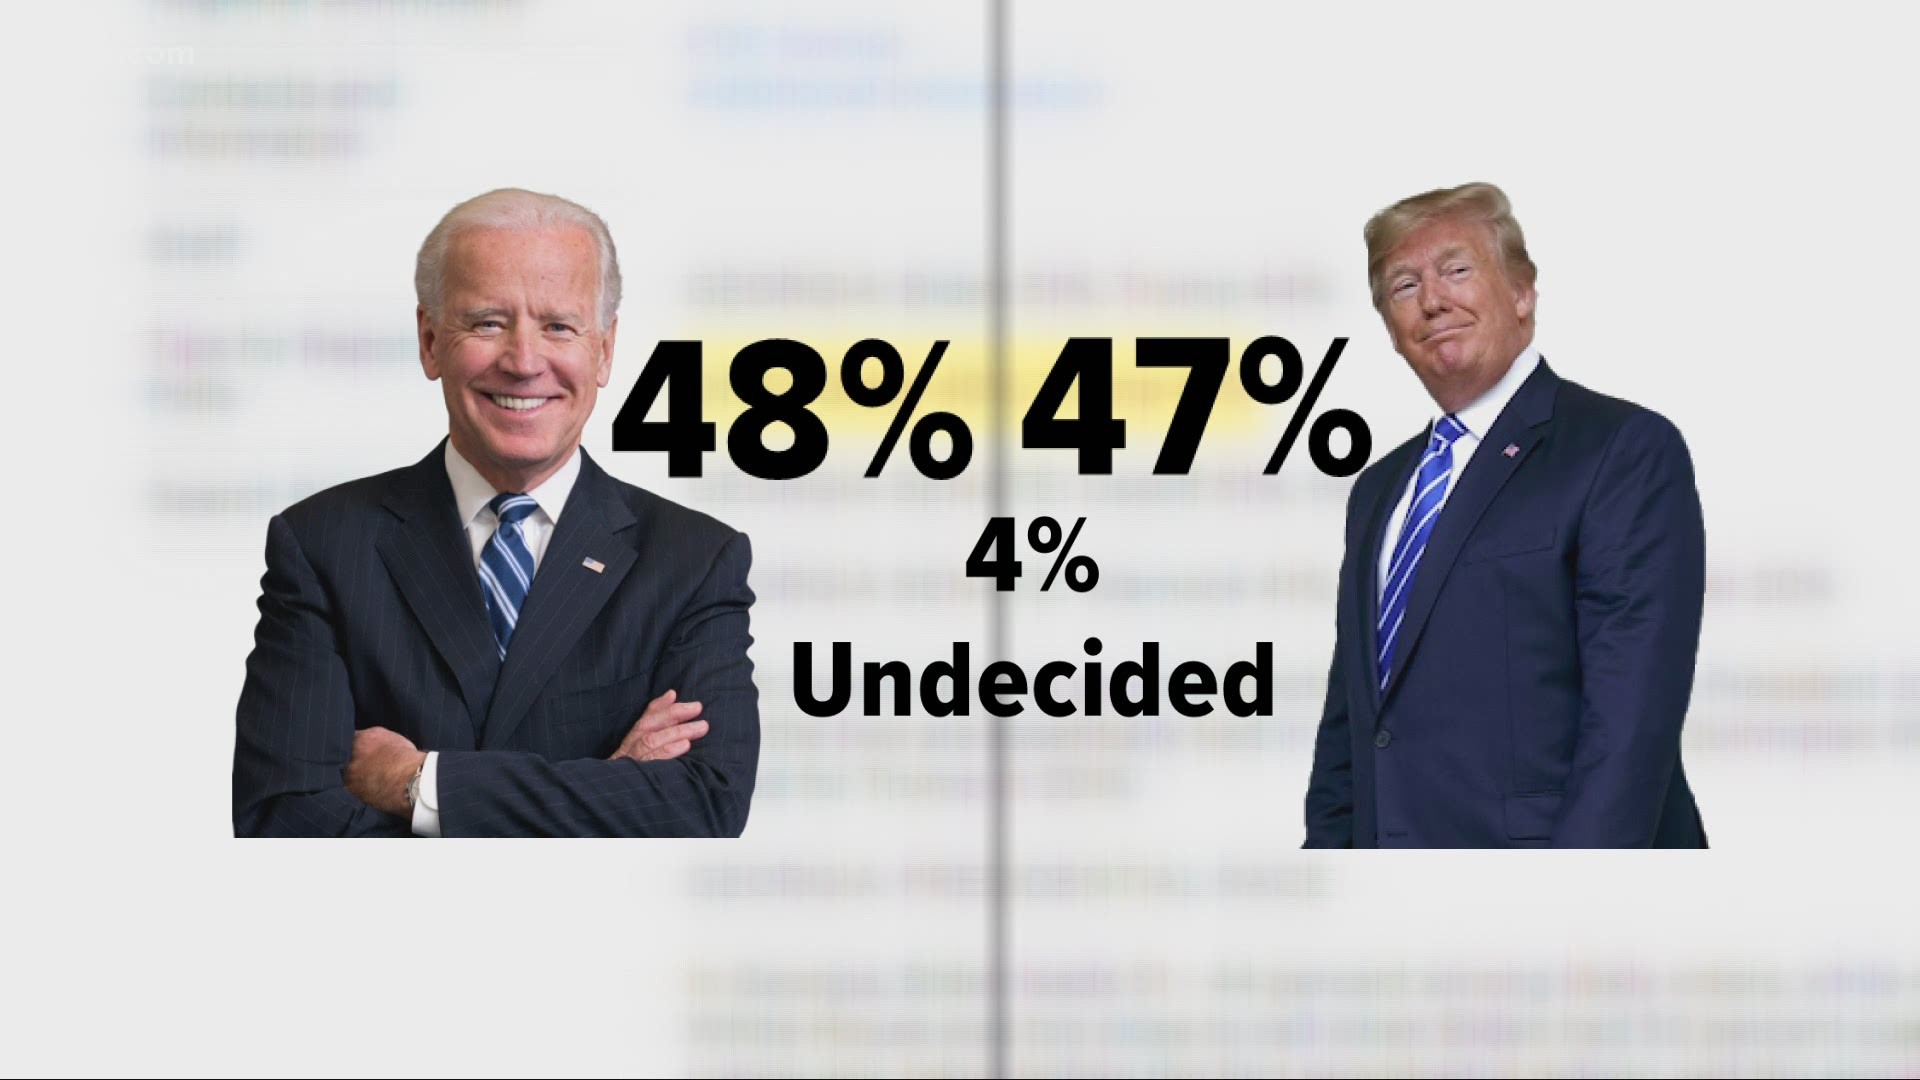 The survey of more than 1,100 likely voters in Ohio shows Biden leading Trump 48%-47%. Four percent are undecided.